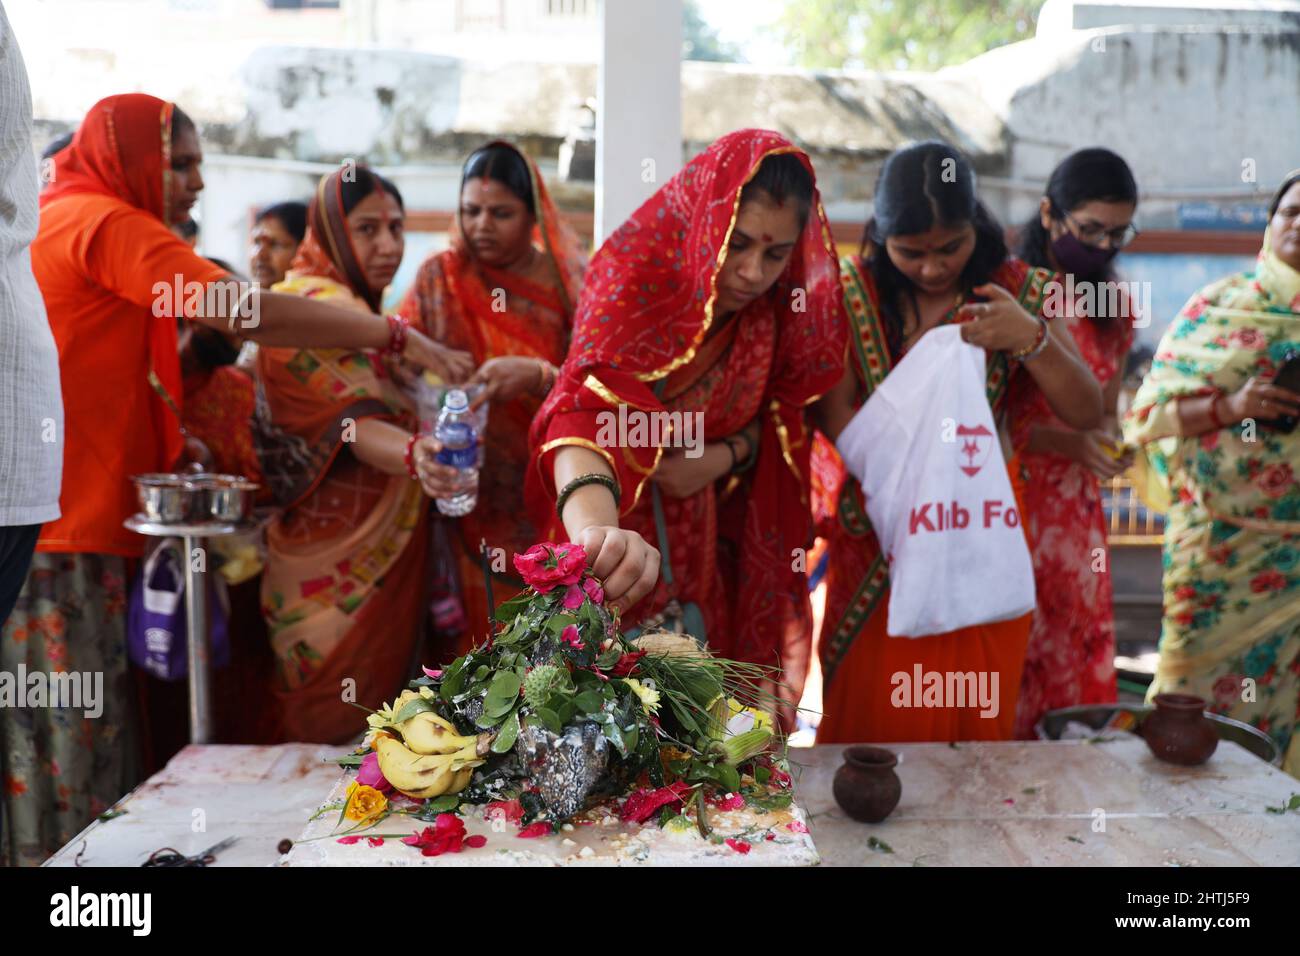 Chennai, Tamil Nadu, India. 1st Mar, 2022. Hindu devotees perform rituals of pouring milk and water onto a Shiva Lingam, a stone sculpture representing Hindu Lord Shiva, on the occasion of the Maha Shivratri festival at a temple in Chennai. (Credit Image: © Sri Loganathan/ZUMA Press Wire) Stock Photo